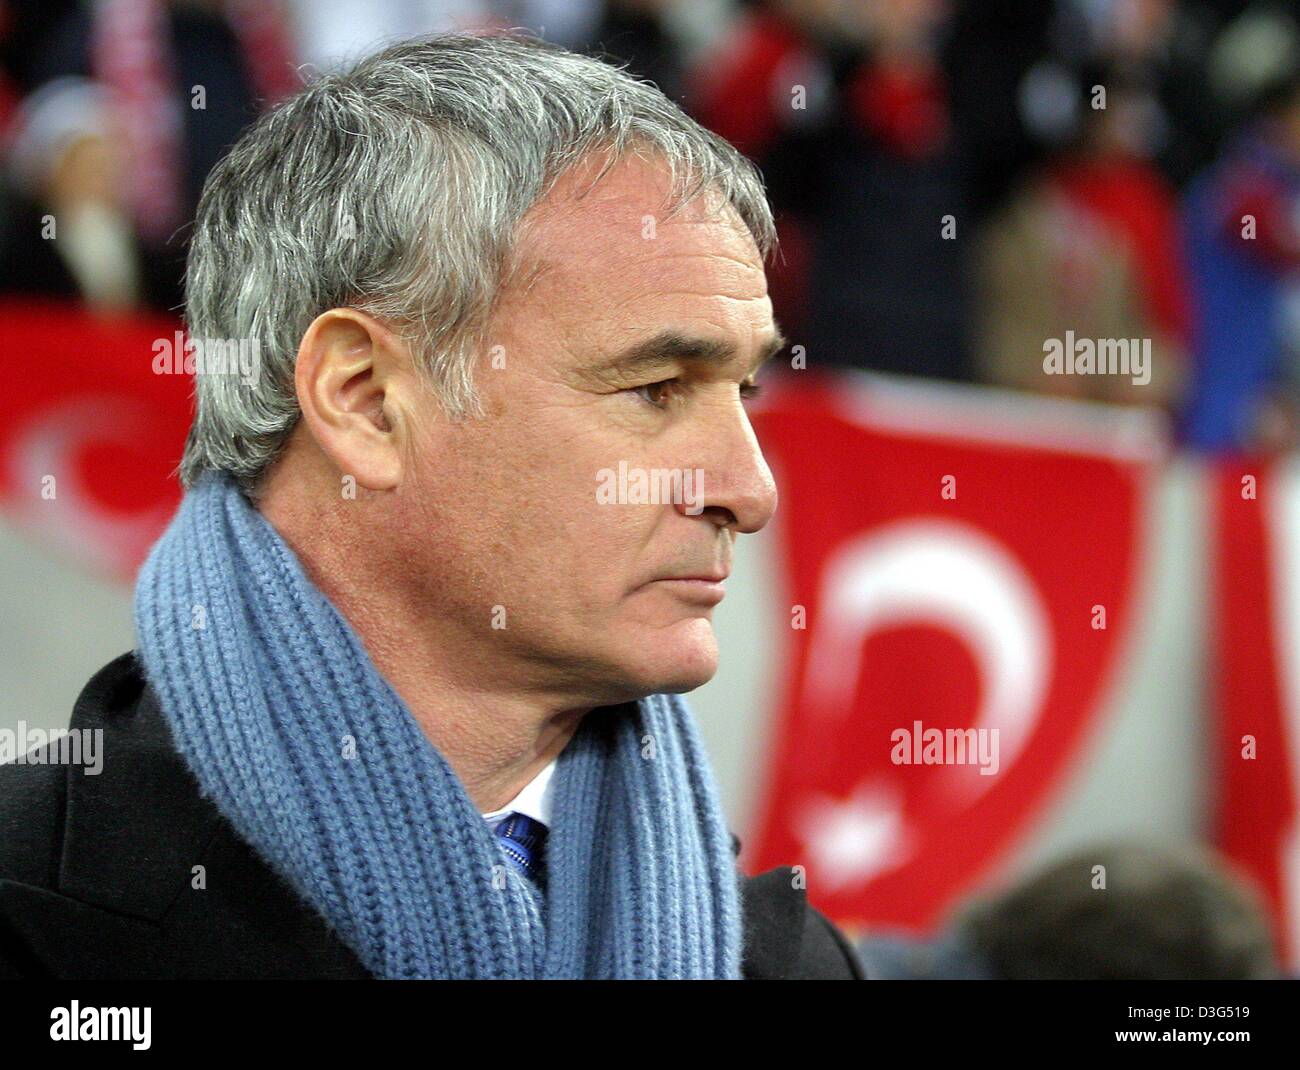 (dpa) - Chelsea's Italian coach Claudio Ranieri watches the European Champions League group game of Chelsea London against Besiktas Istanbul in Gelsenkirchen, Germany, 9 December 2003. Chelsea won the game 2-0 and enters the Round of 16 as group winner. The game was relocated from Istanbul to Germany because of the recent bomb attacks in the Turkish metropolis. Stock Photo